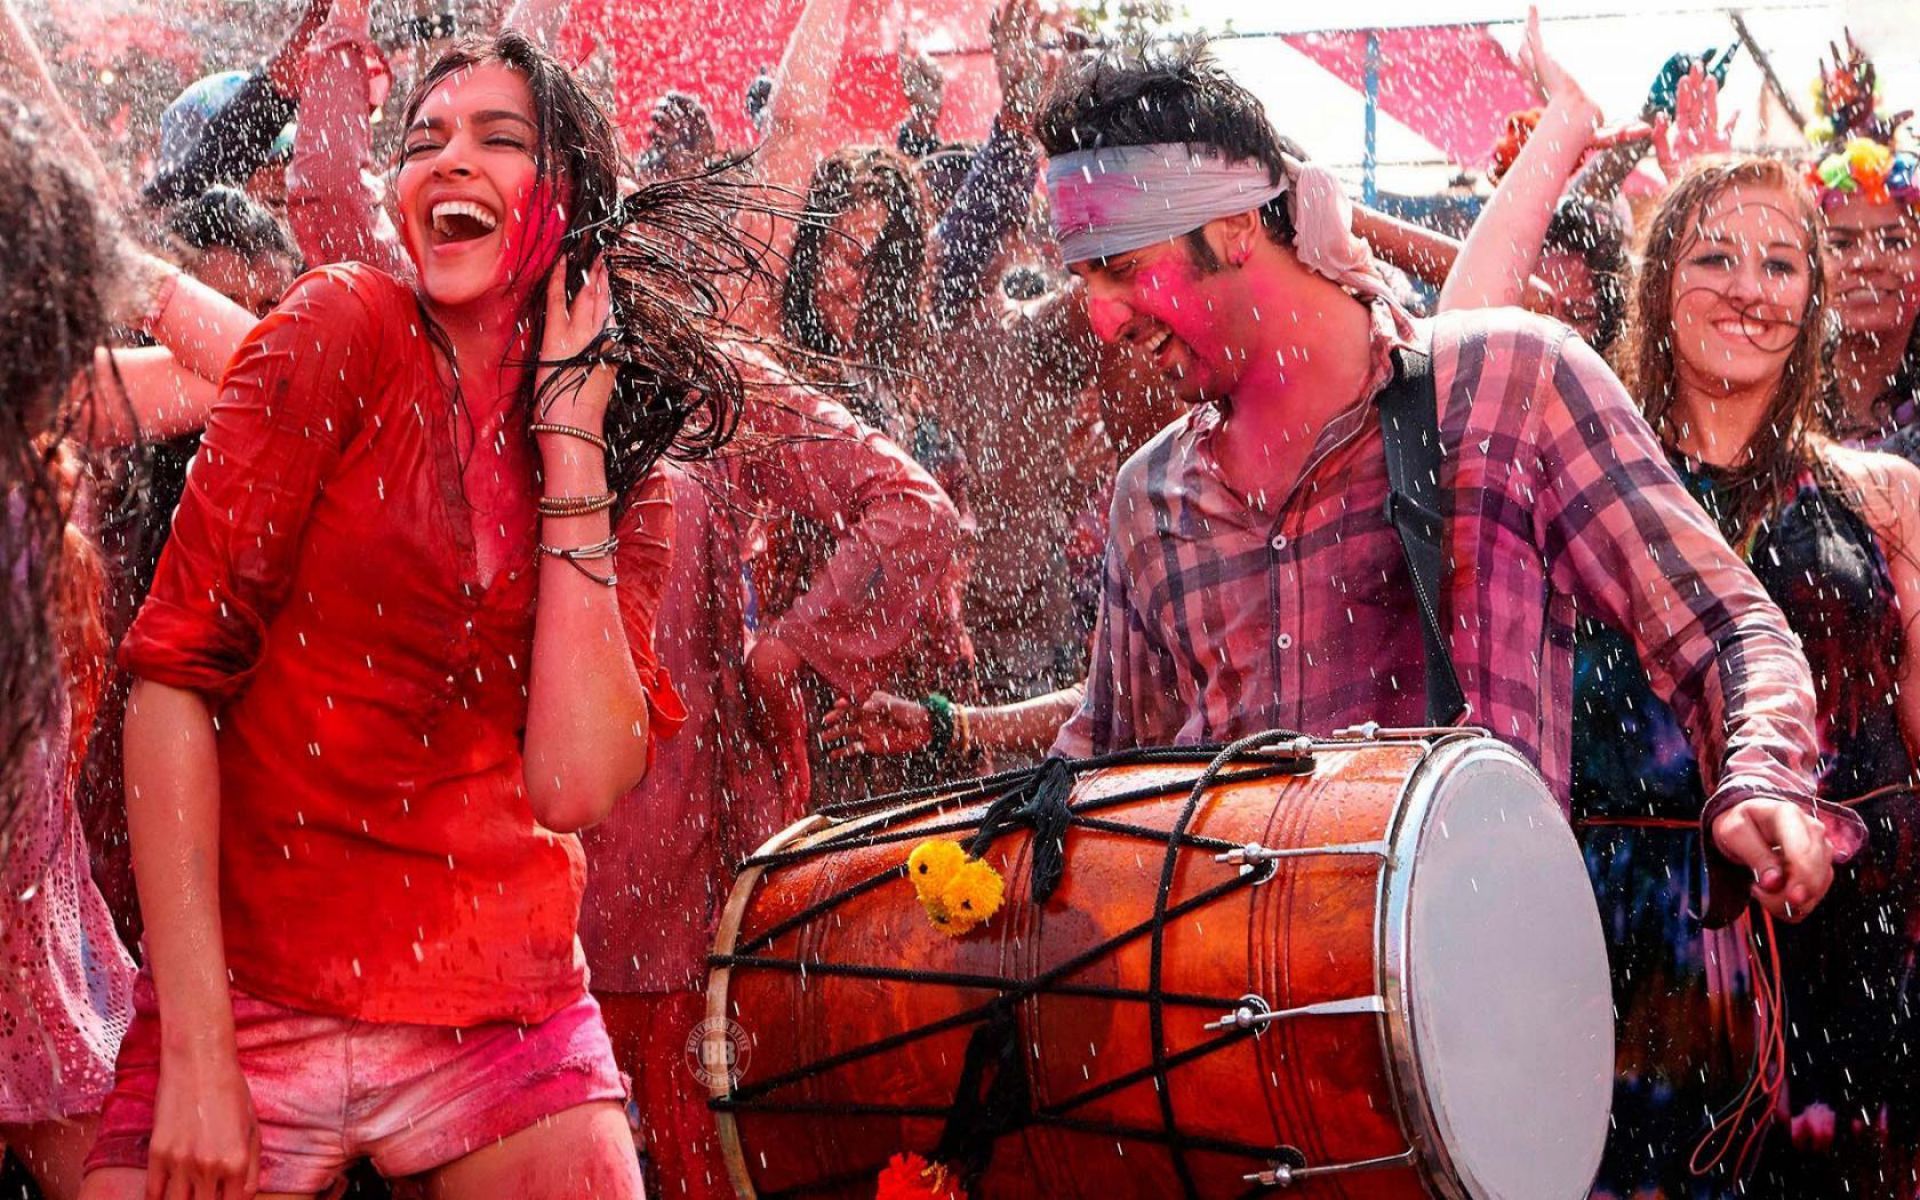 Holi: The legends behind India's festival of color